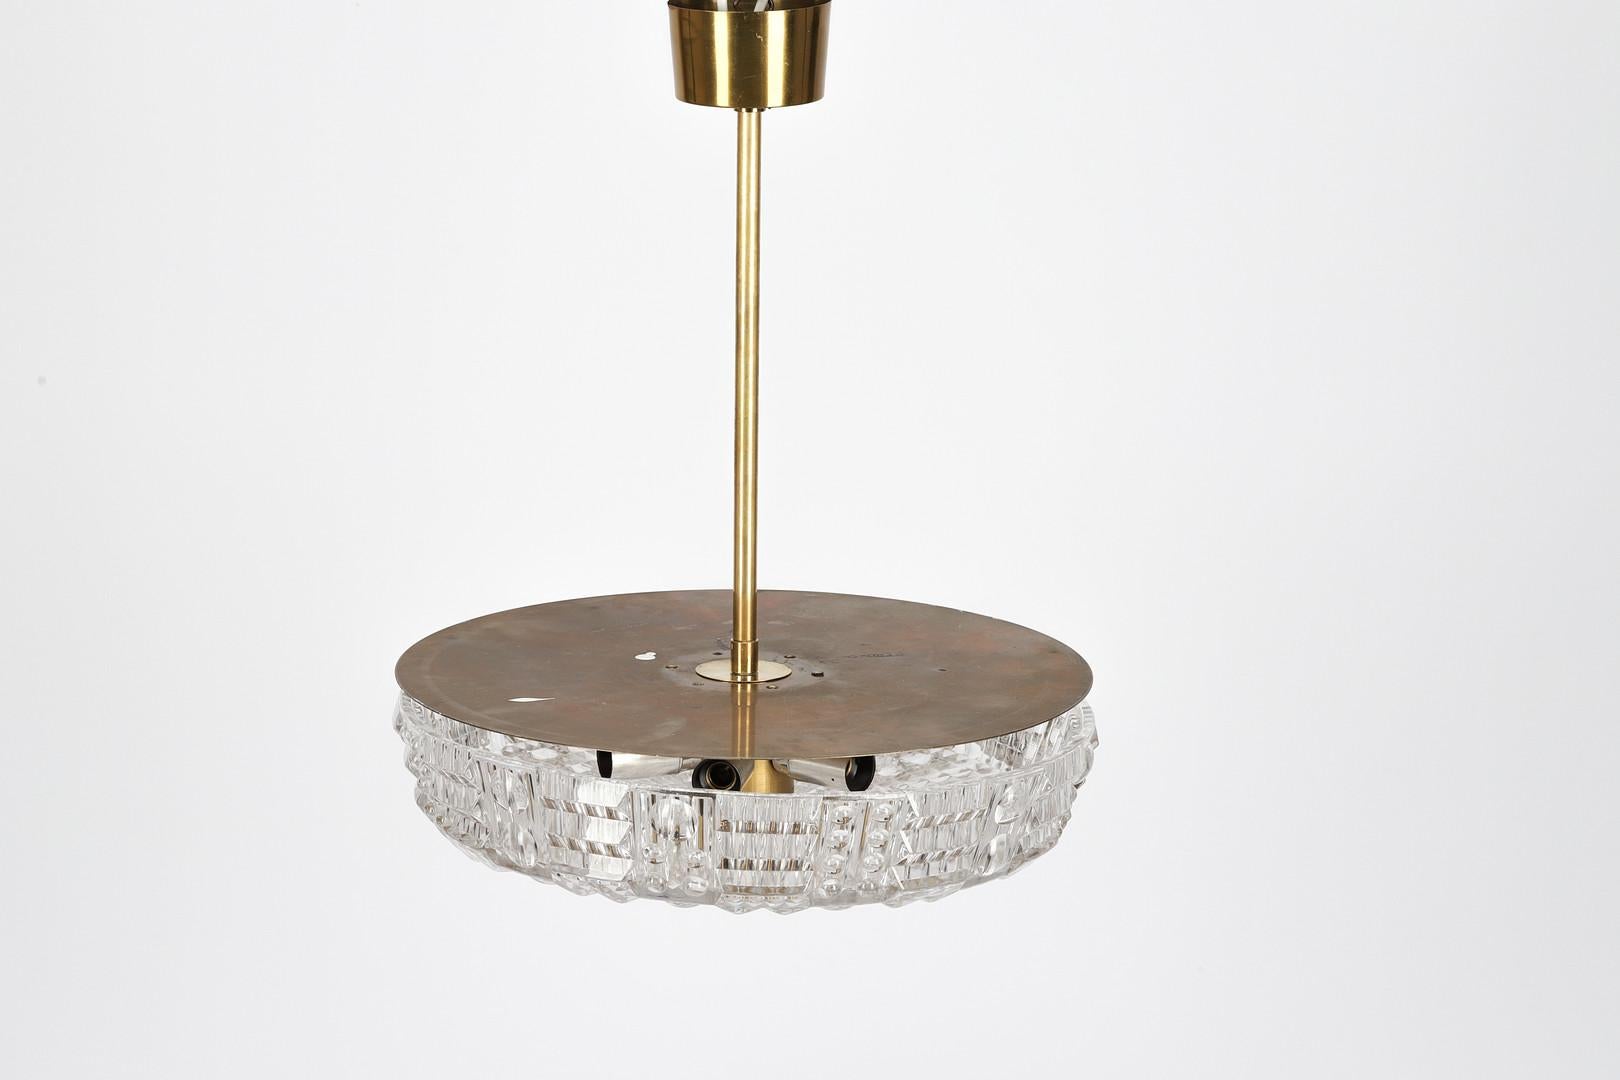 A Swedish Orrefors ceiling fixture made by Carl Fagerlund with textured molded glass dish having canted sides and round plate. Each fixture has new wiring with 6 UL certified sockets.